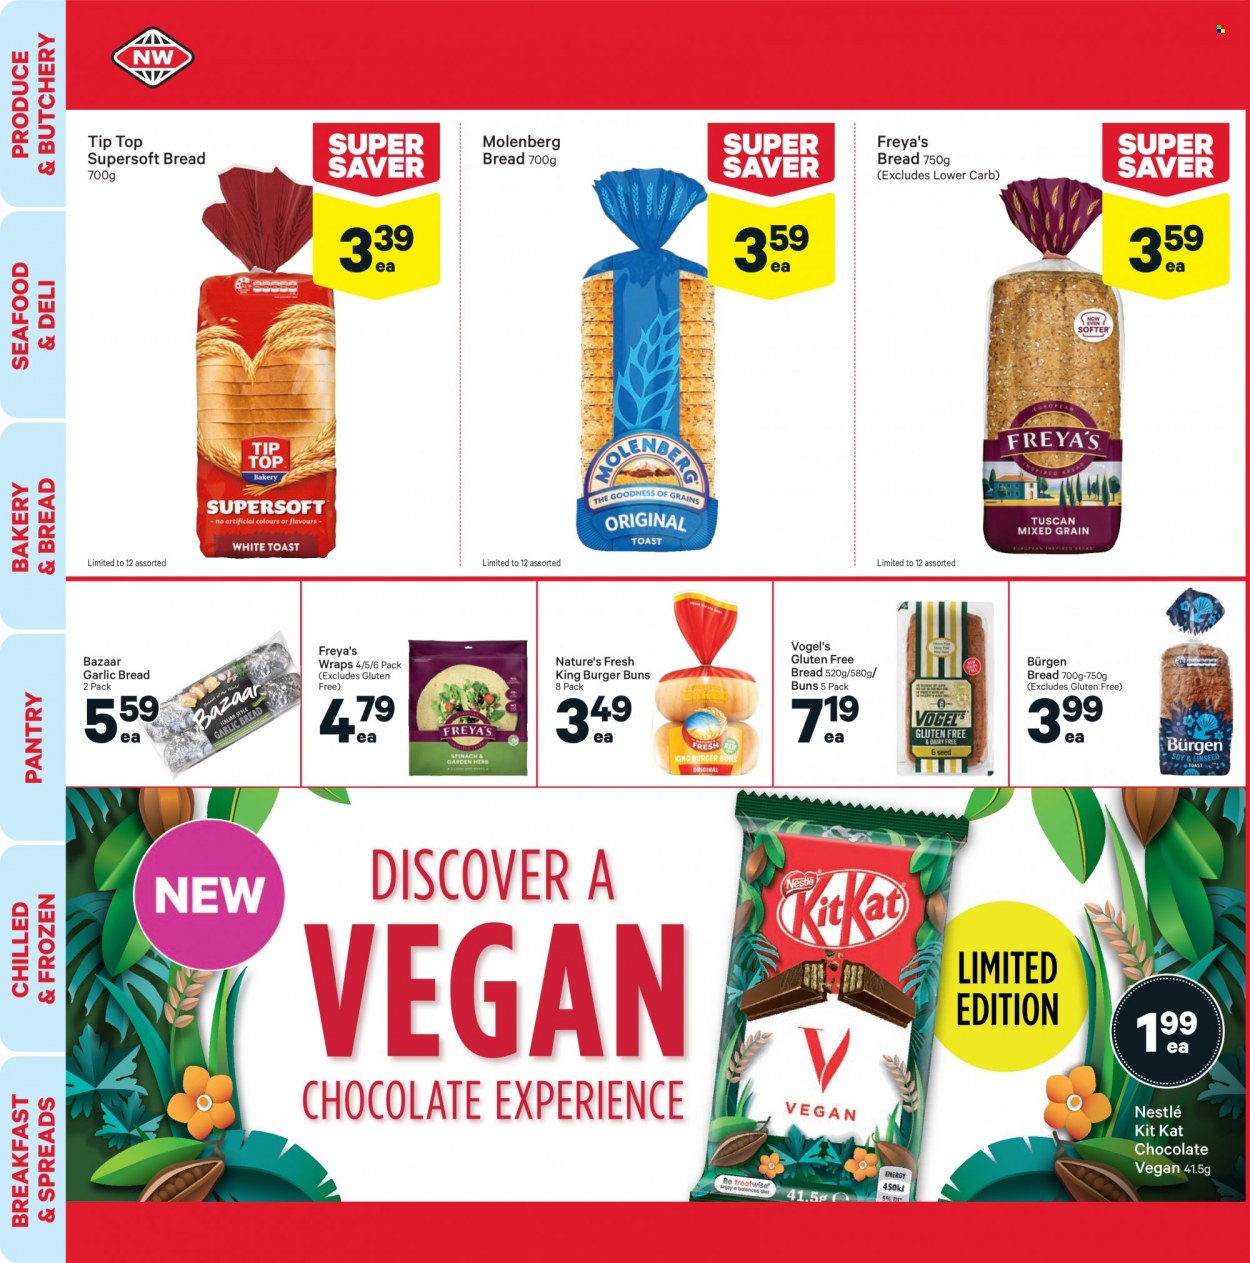 thumbnail - New World mailer - 11.10.2021 - 17.10.2021 - Sales products - bread, Tip Top, buns, burger buns, wraps, spinach, seafood, Nestlé, chocolate, KitKat, herbs. Page 18.